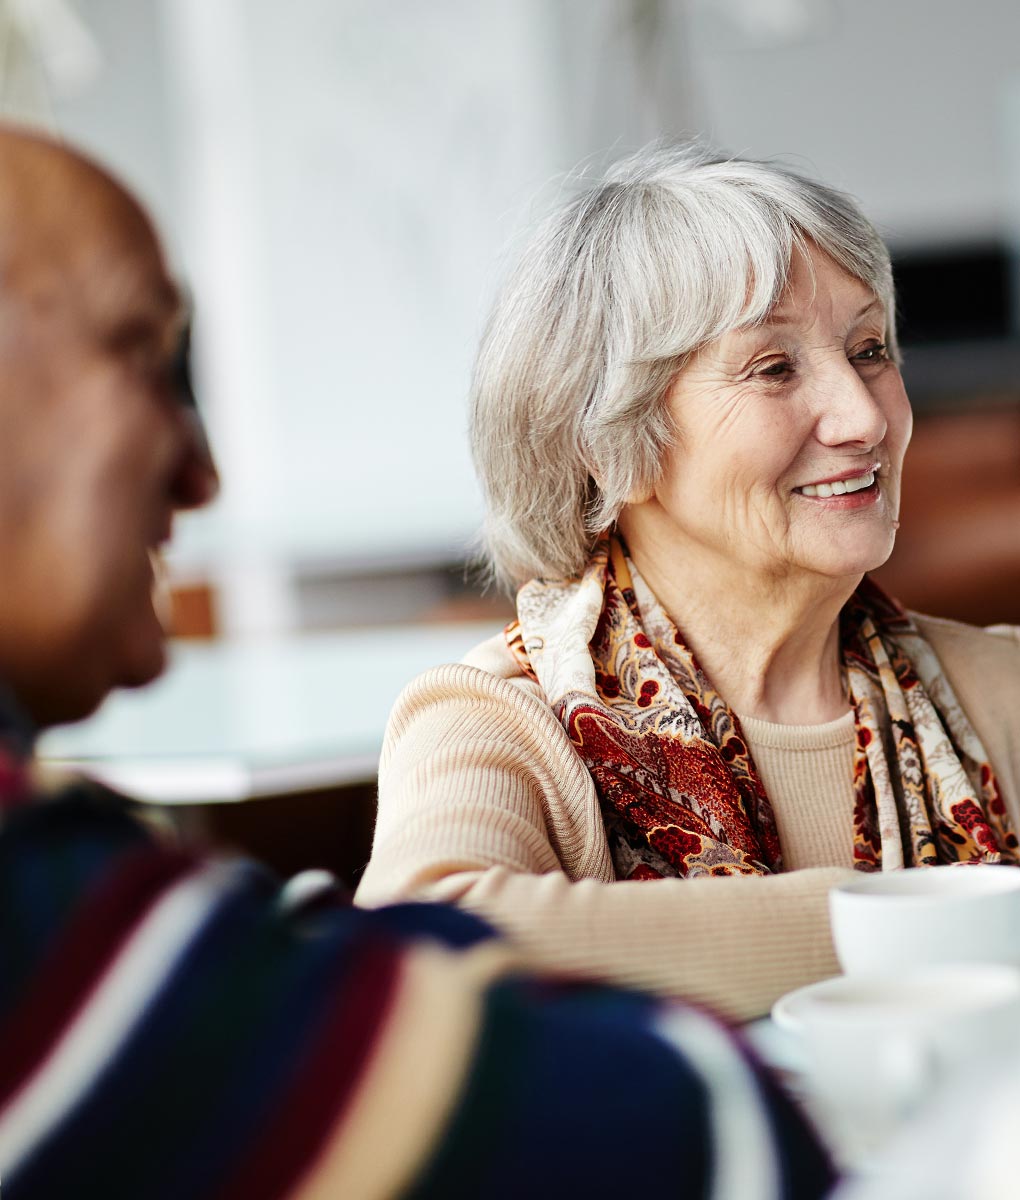 Helping seniors age with optimism